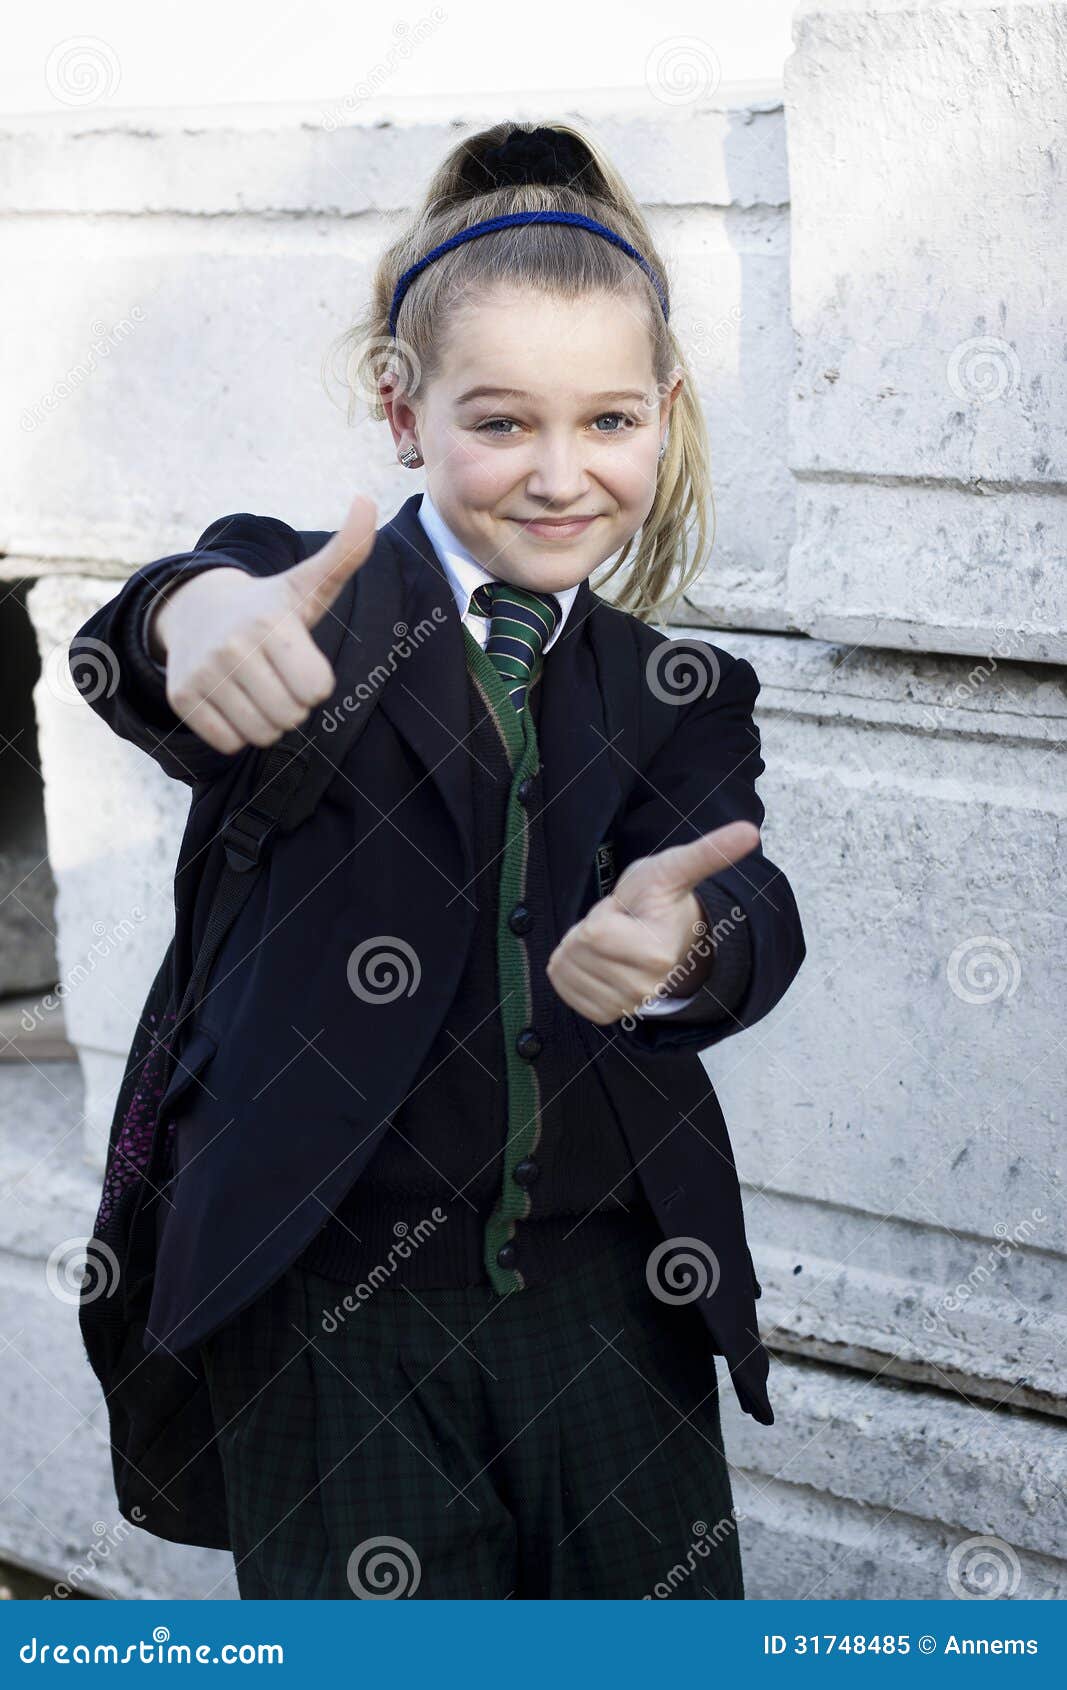 Student thumbs up stock image. Image of energy, dimple - 31748485